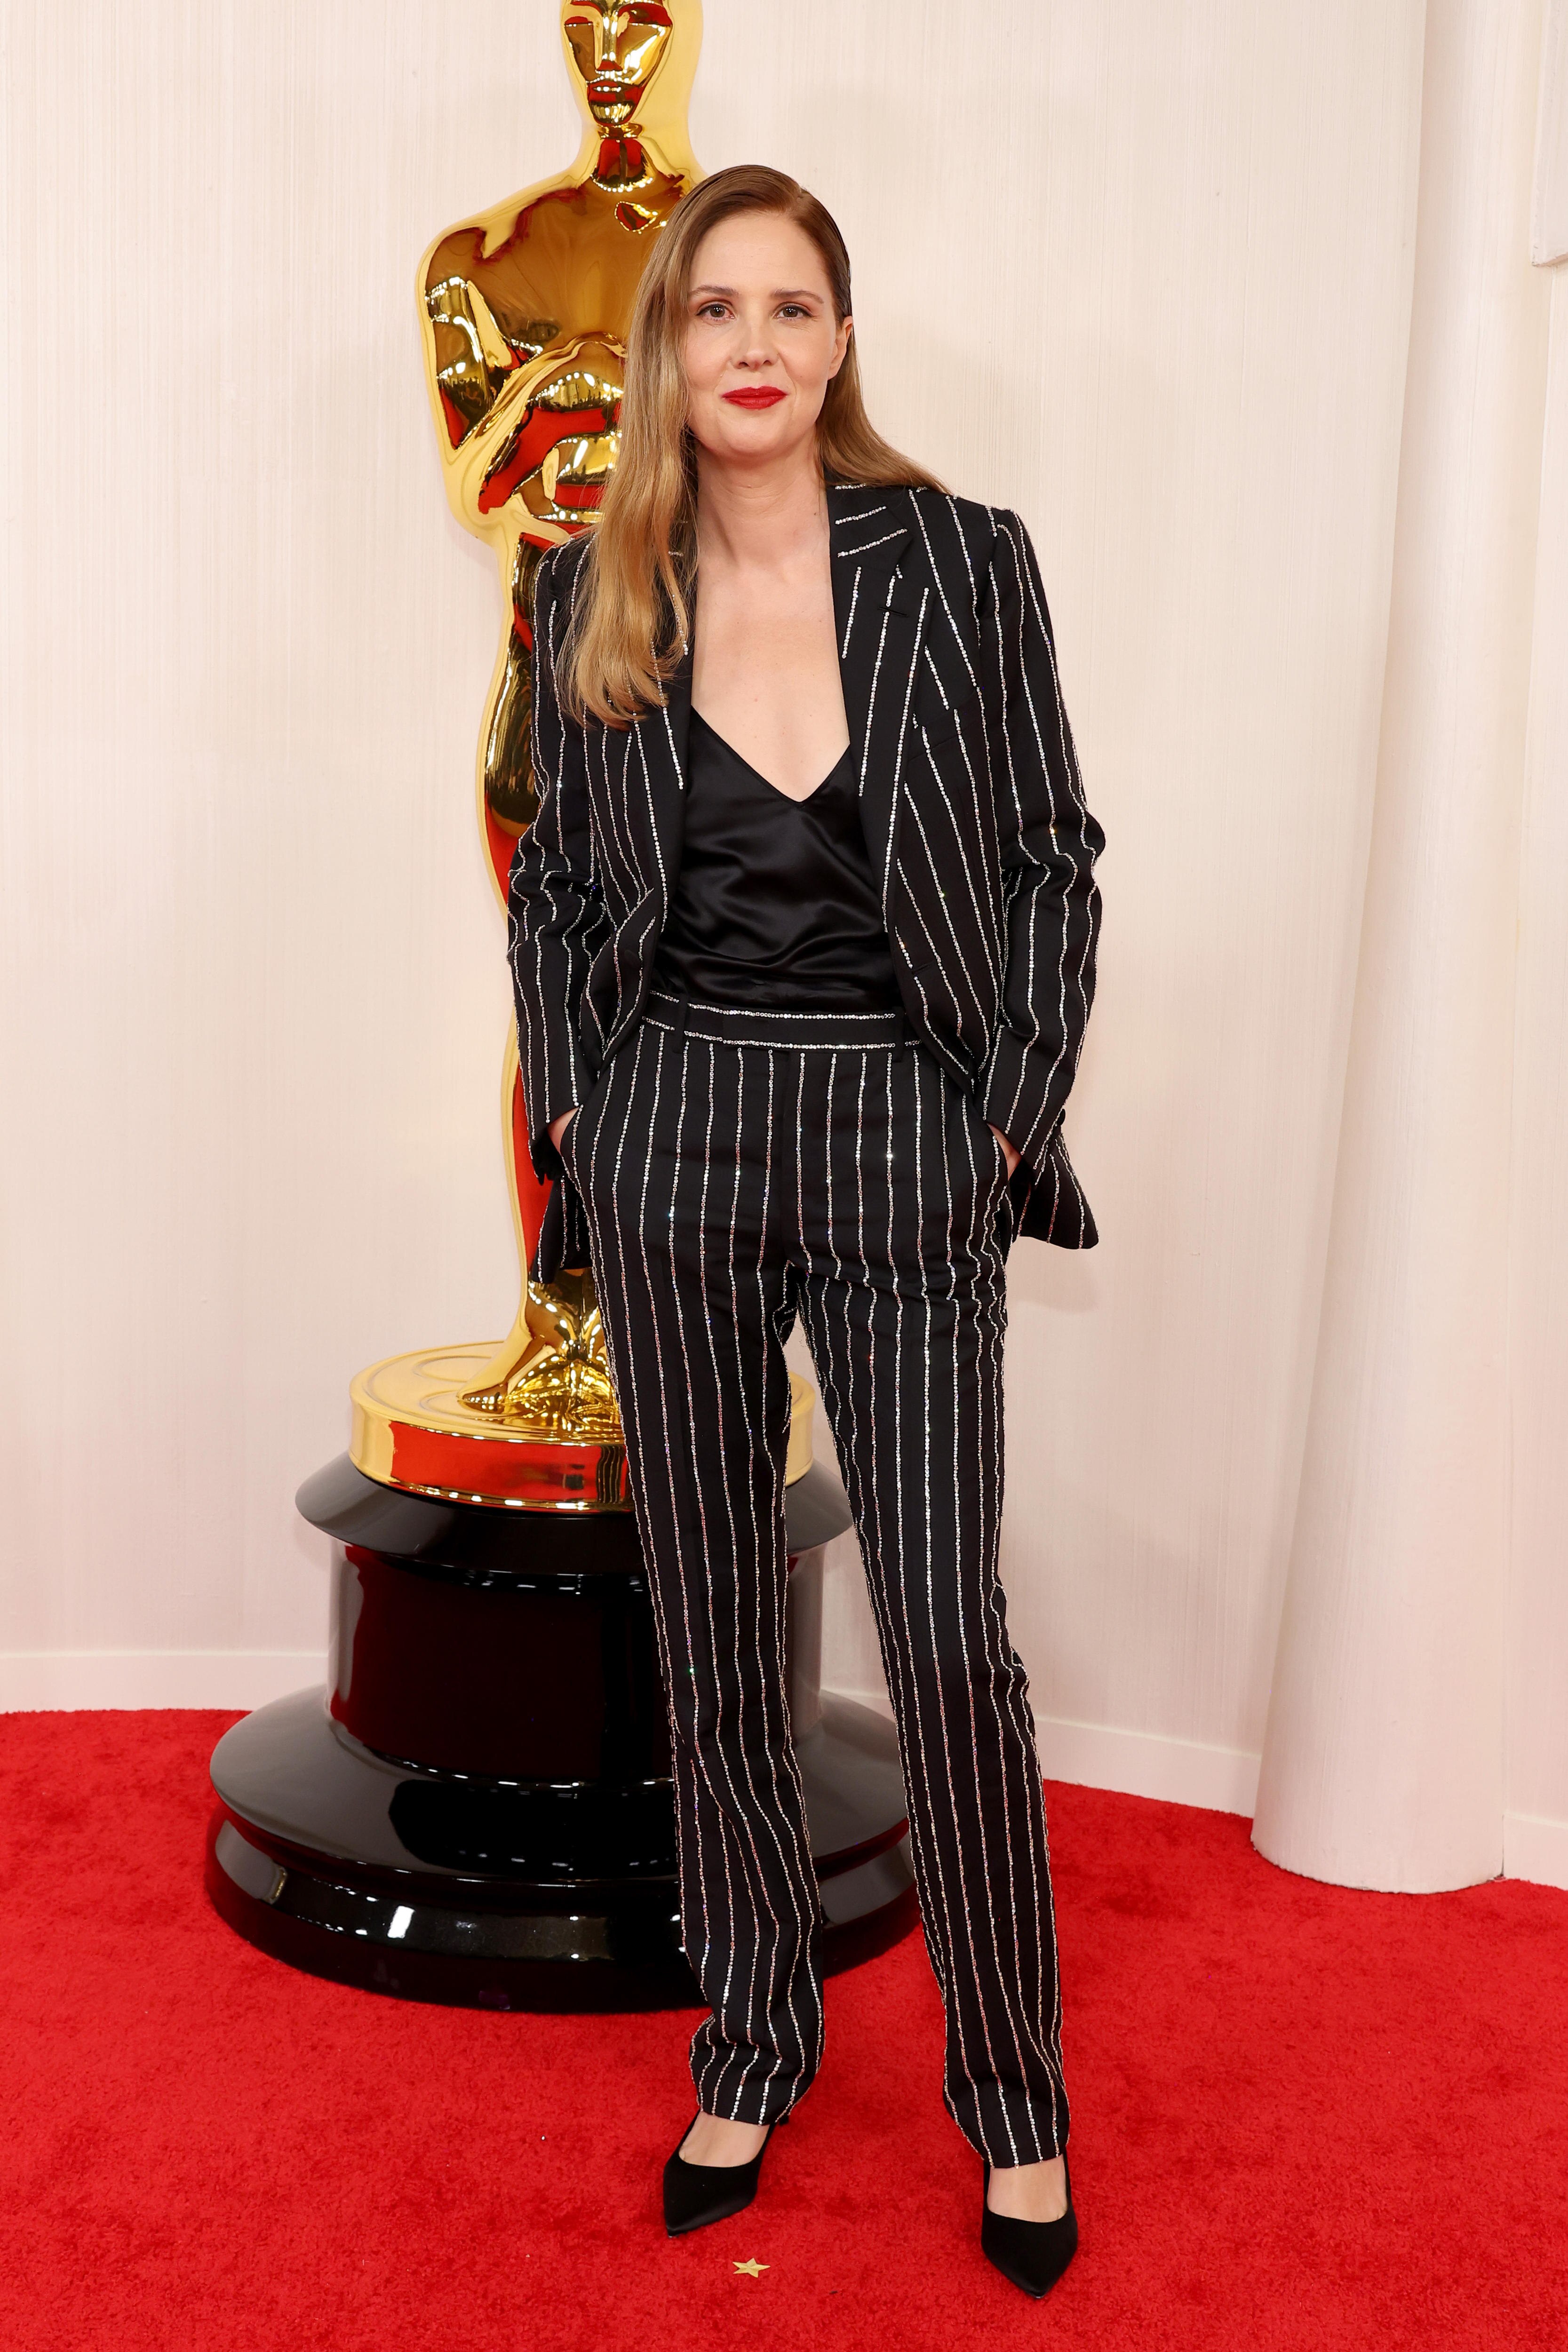 Justine Triet poses on the Oscars red carpet.